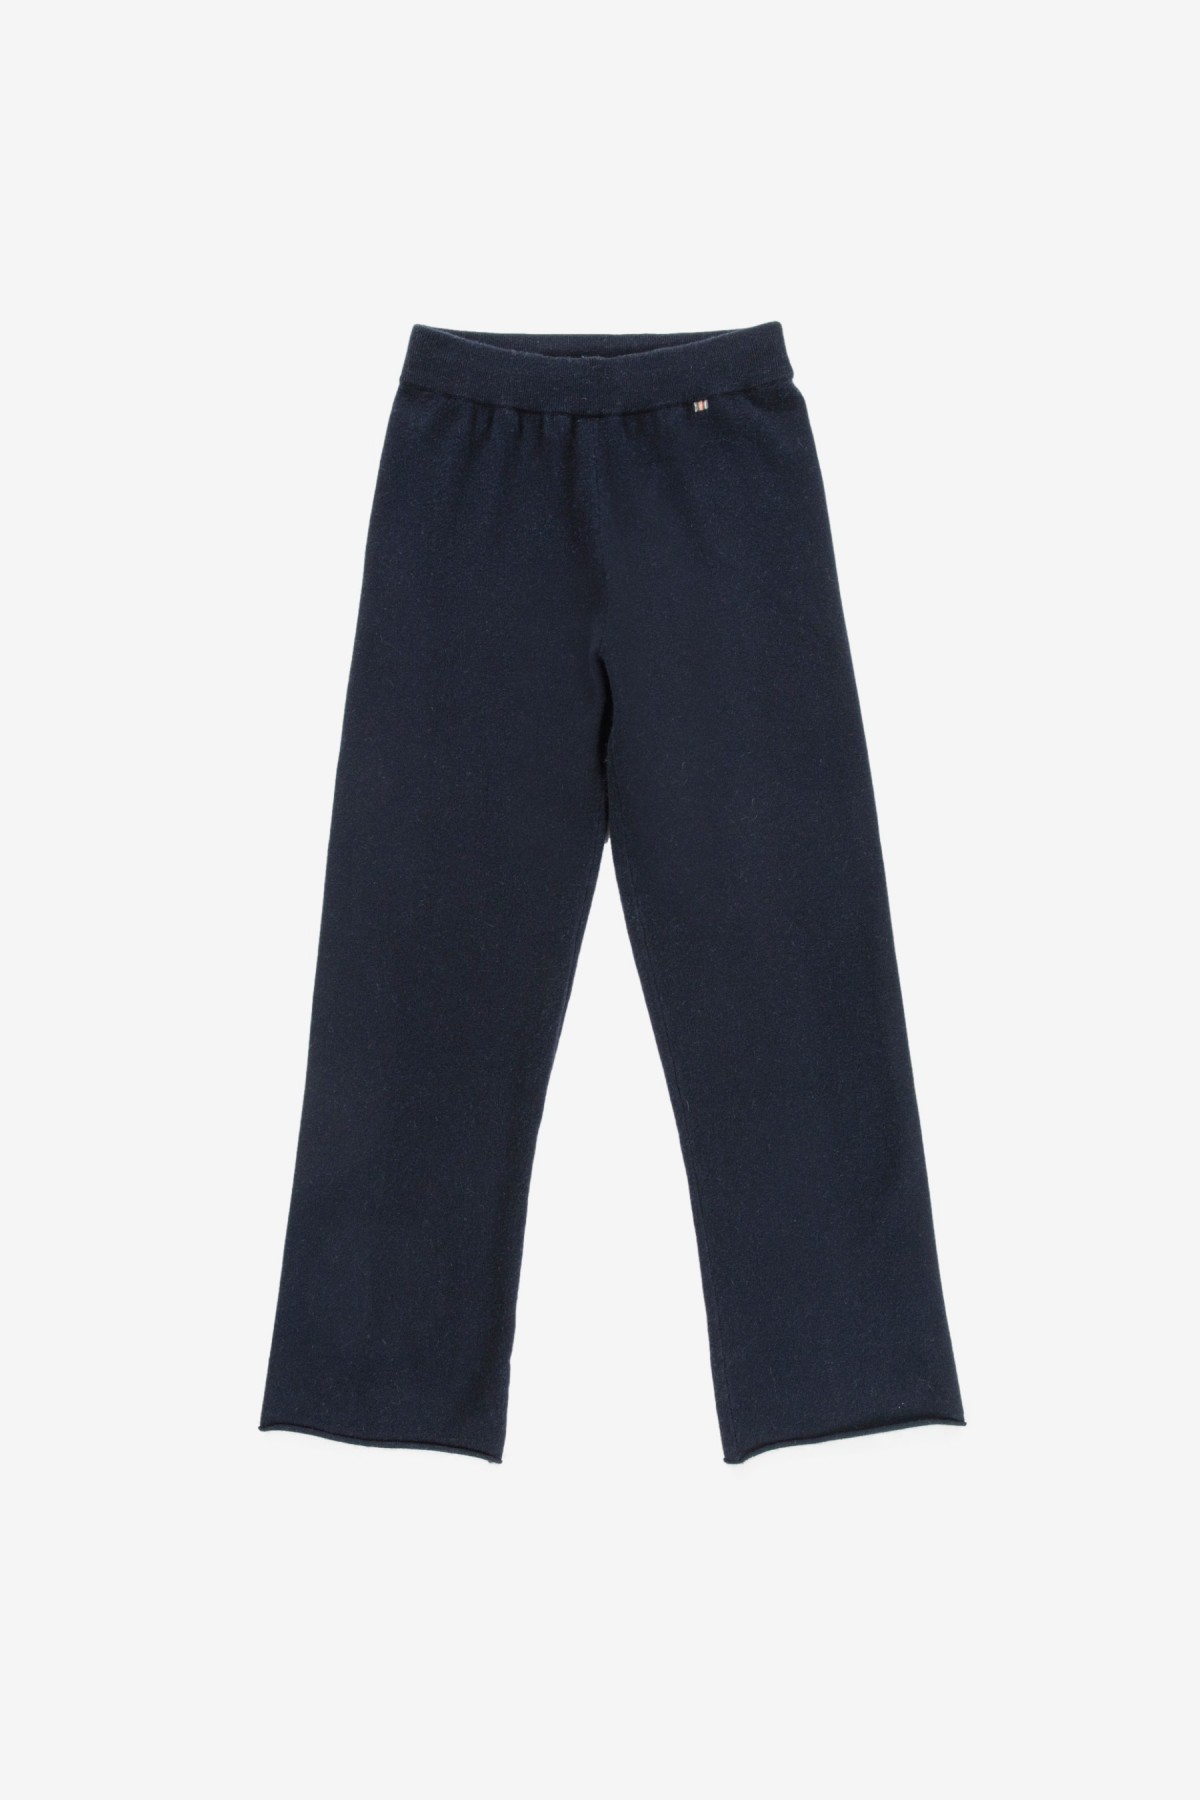 extreme cashmere N°104 Trousers in Navy